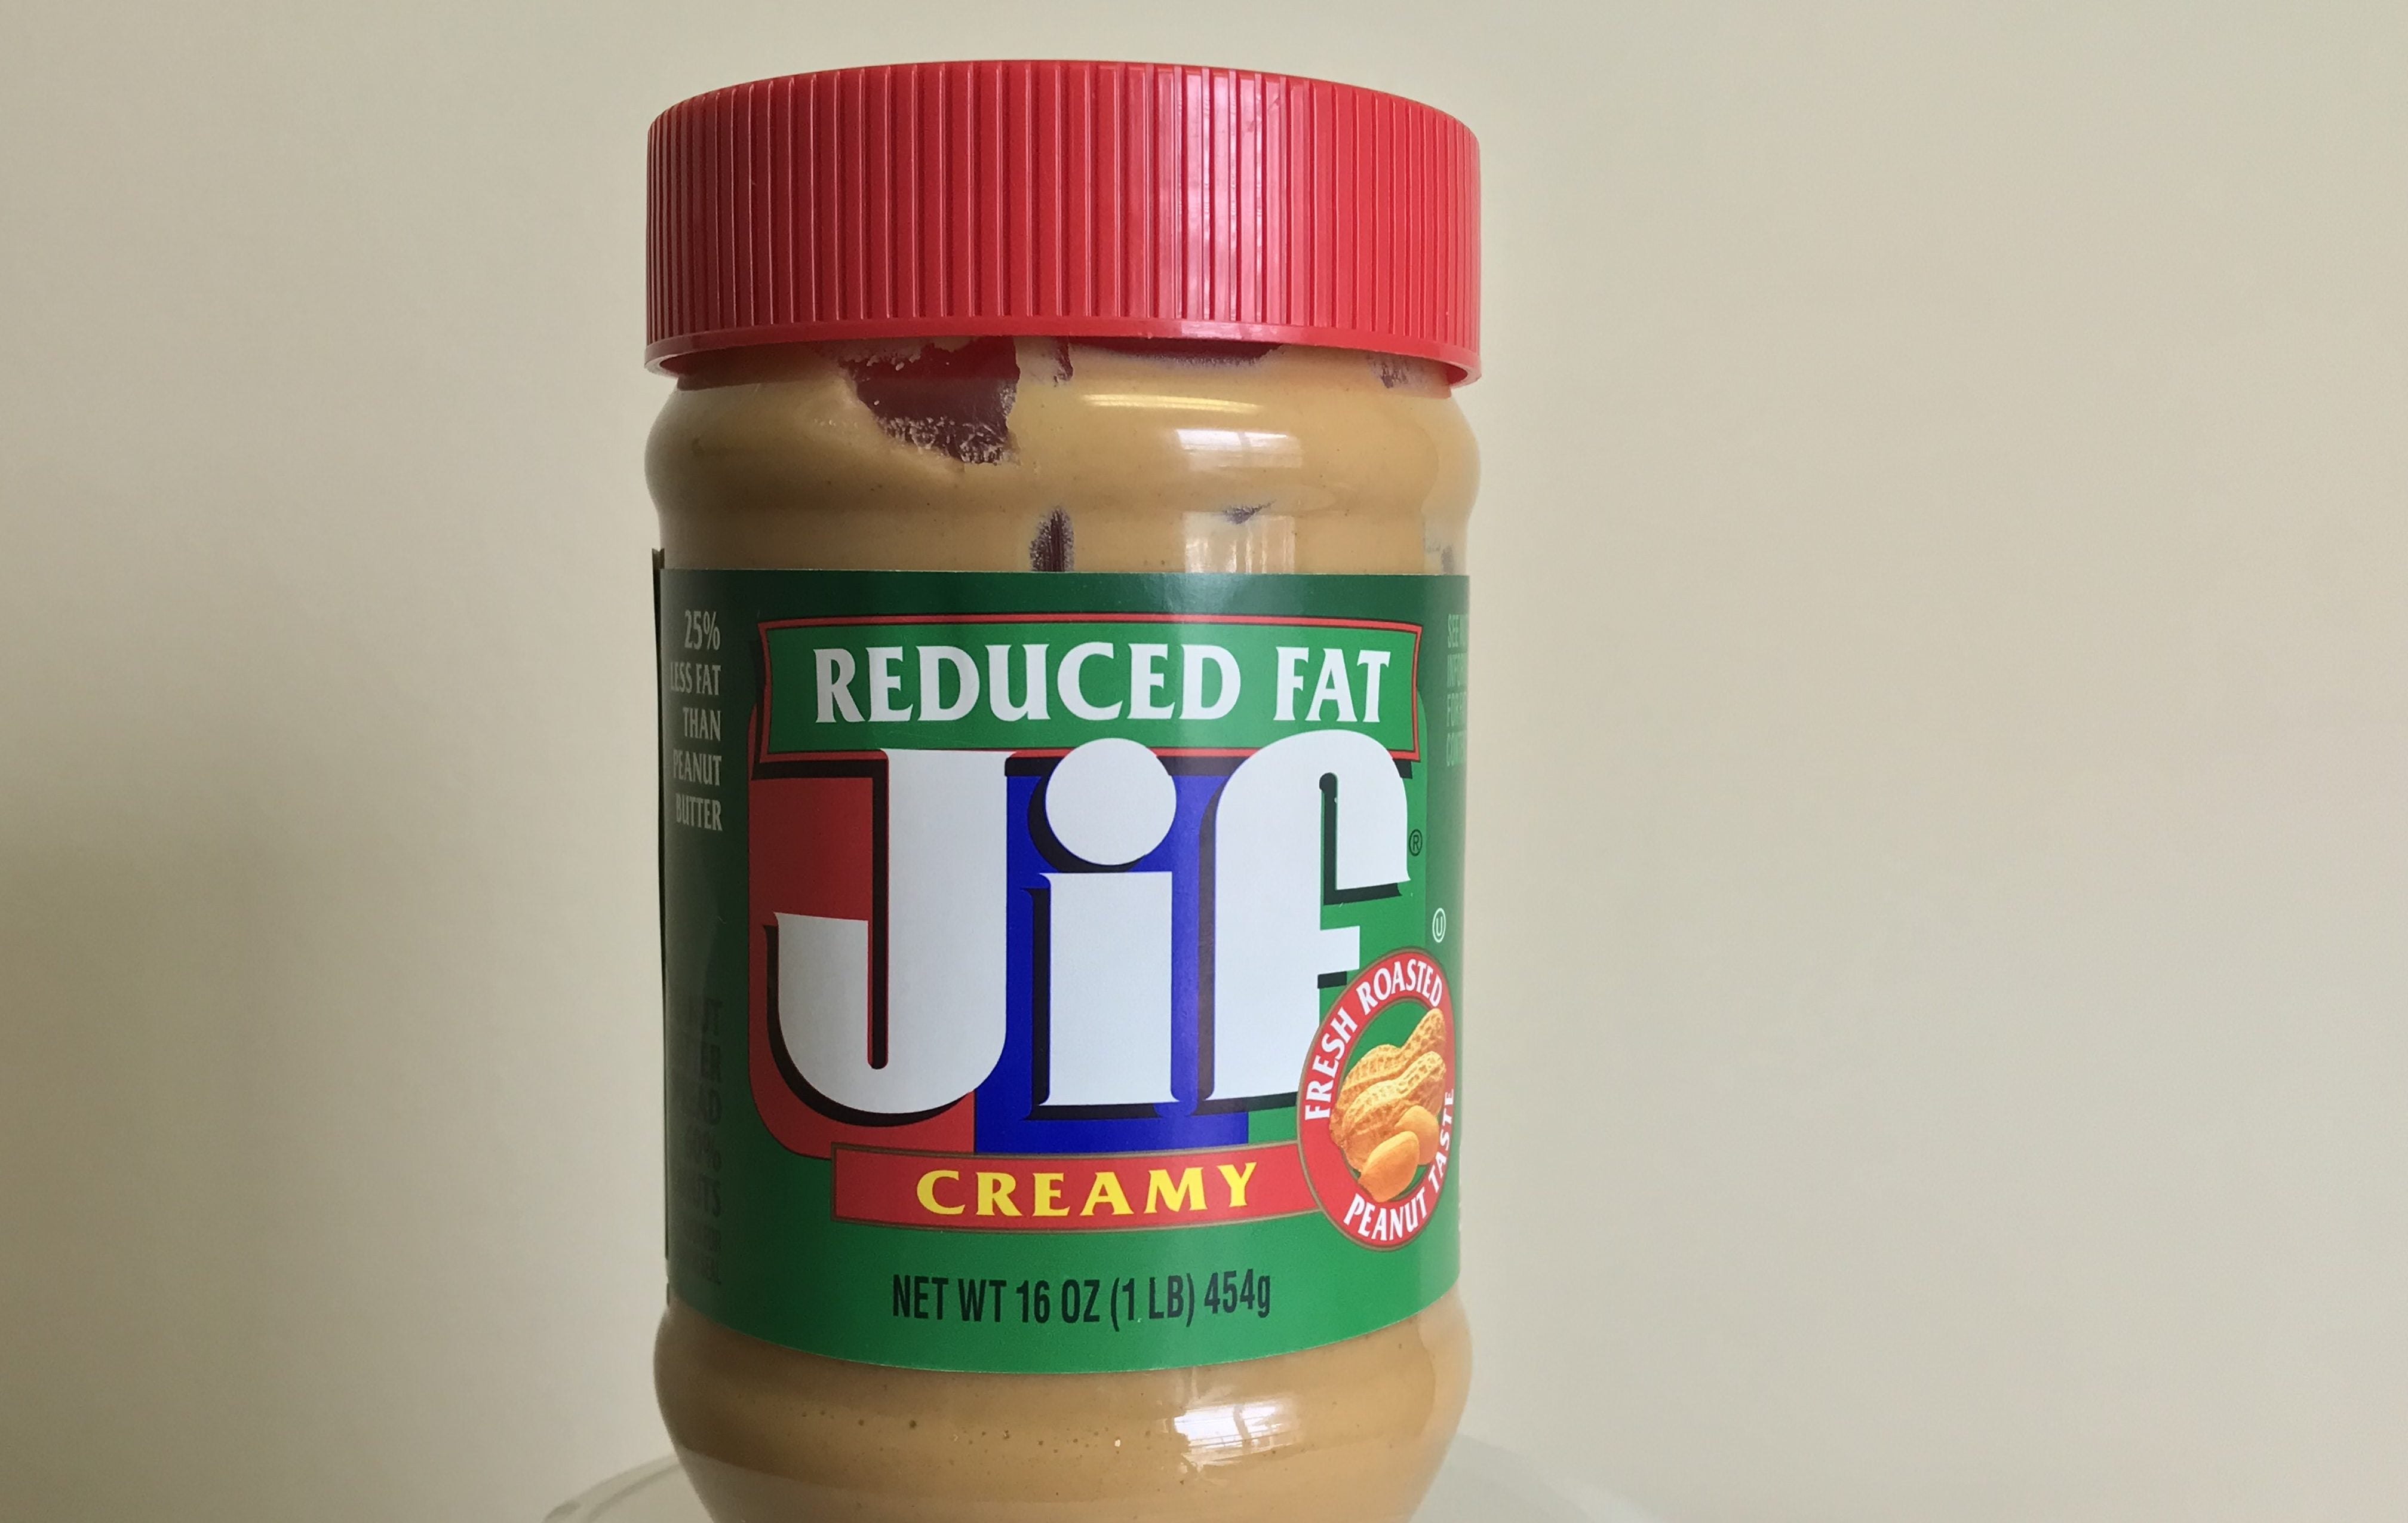 List of recalled Jif peanut butter products has expanded The Interior